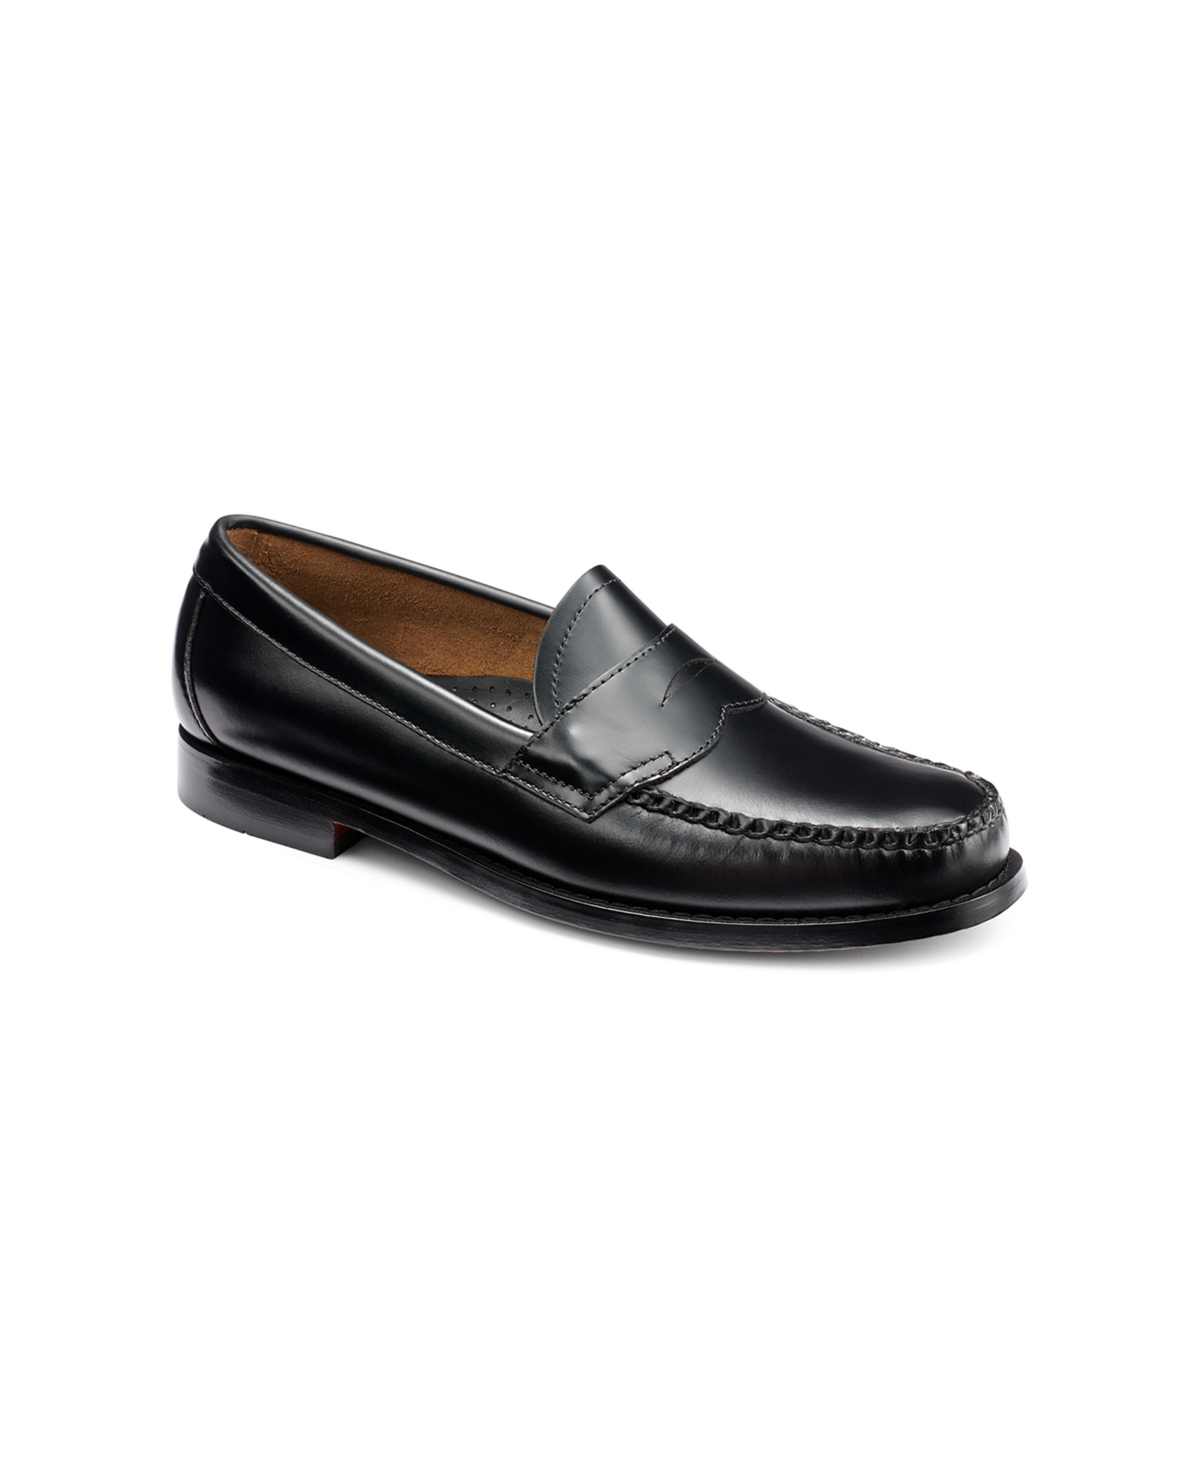 Gh Bass Men's 1936 Logan Flat Strap Weejuns Loafers Men's Shoes In ...